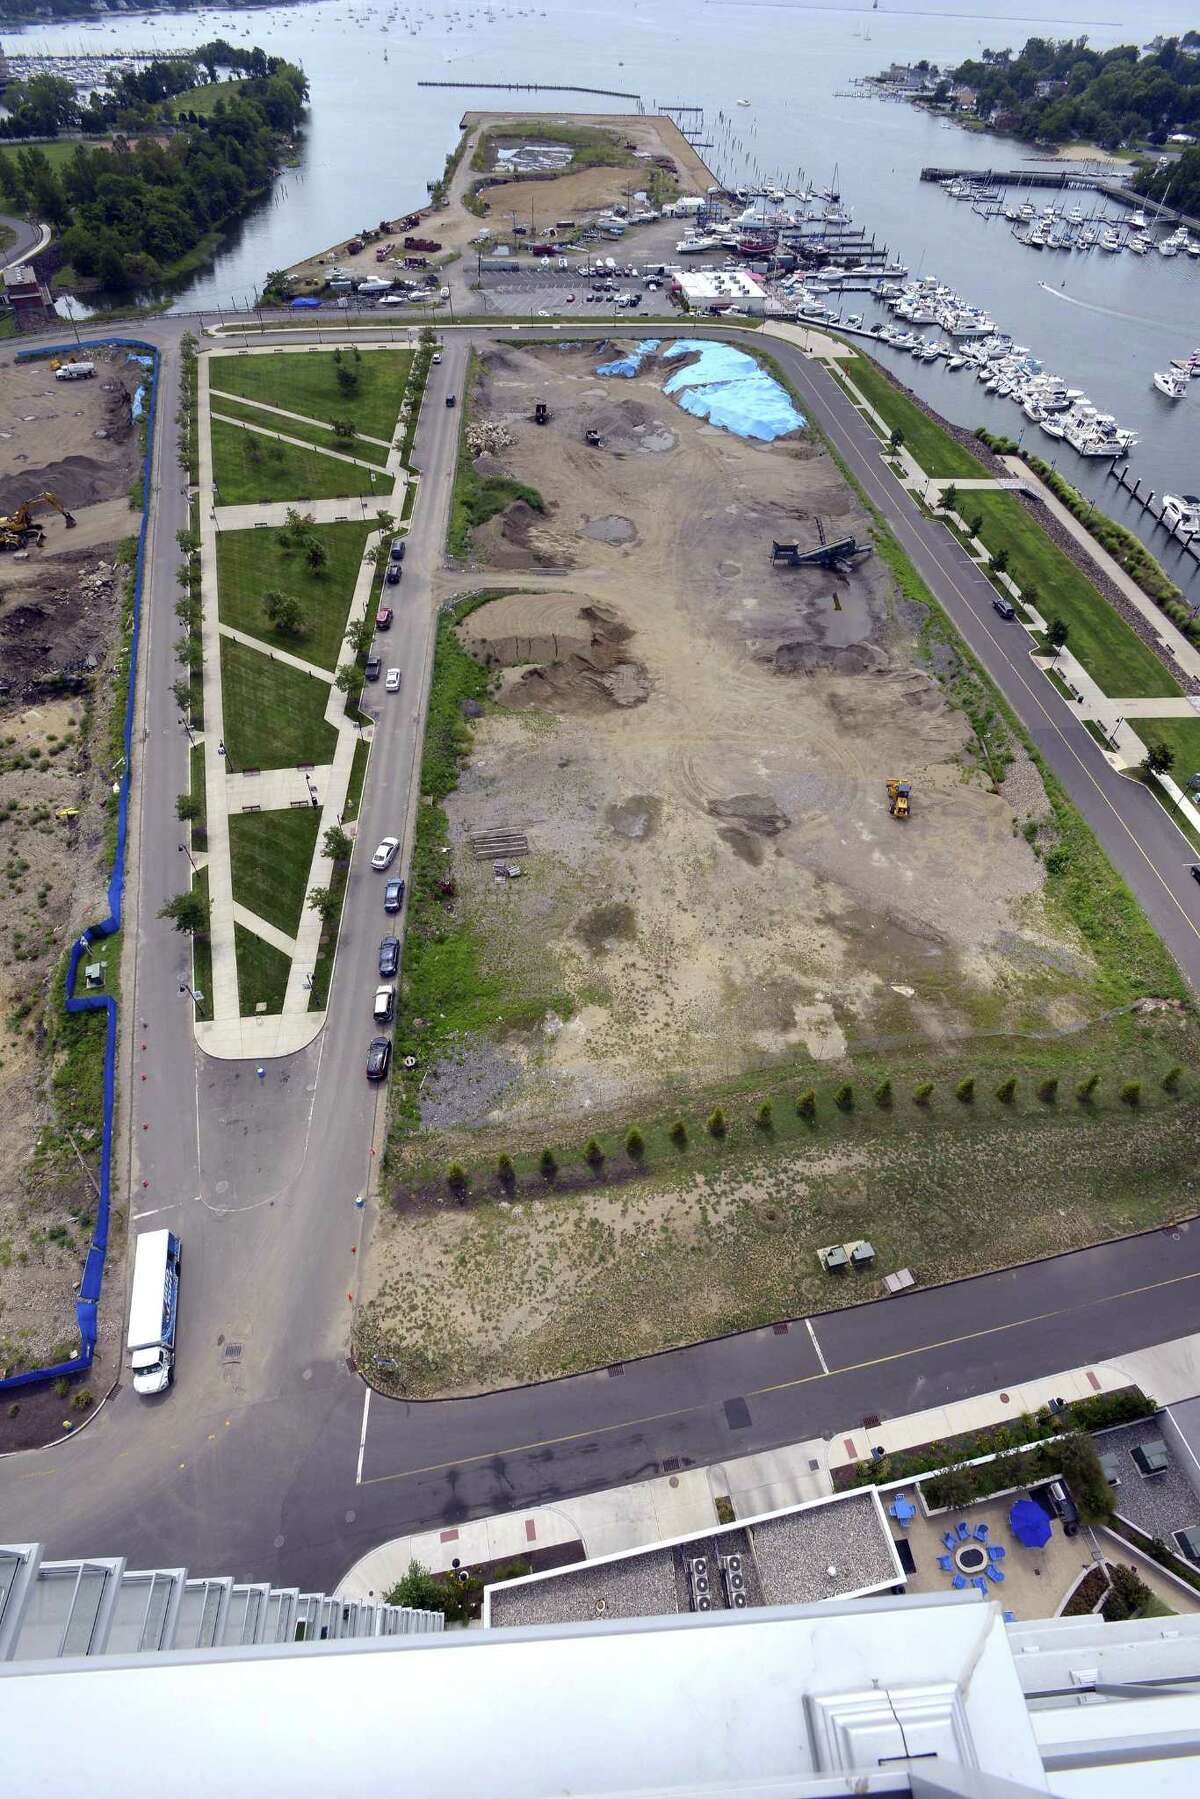 A 14-acre parcel of land at the top of this photo once housed Stamford’s last working boatyard.